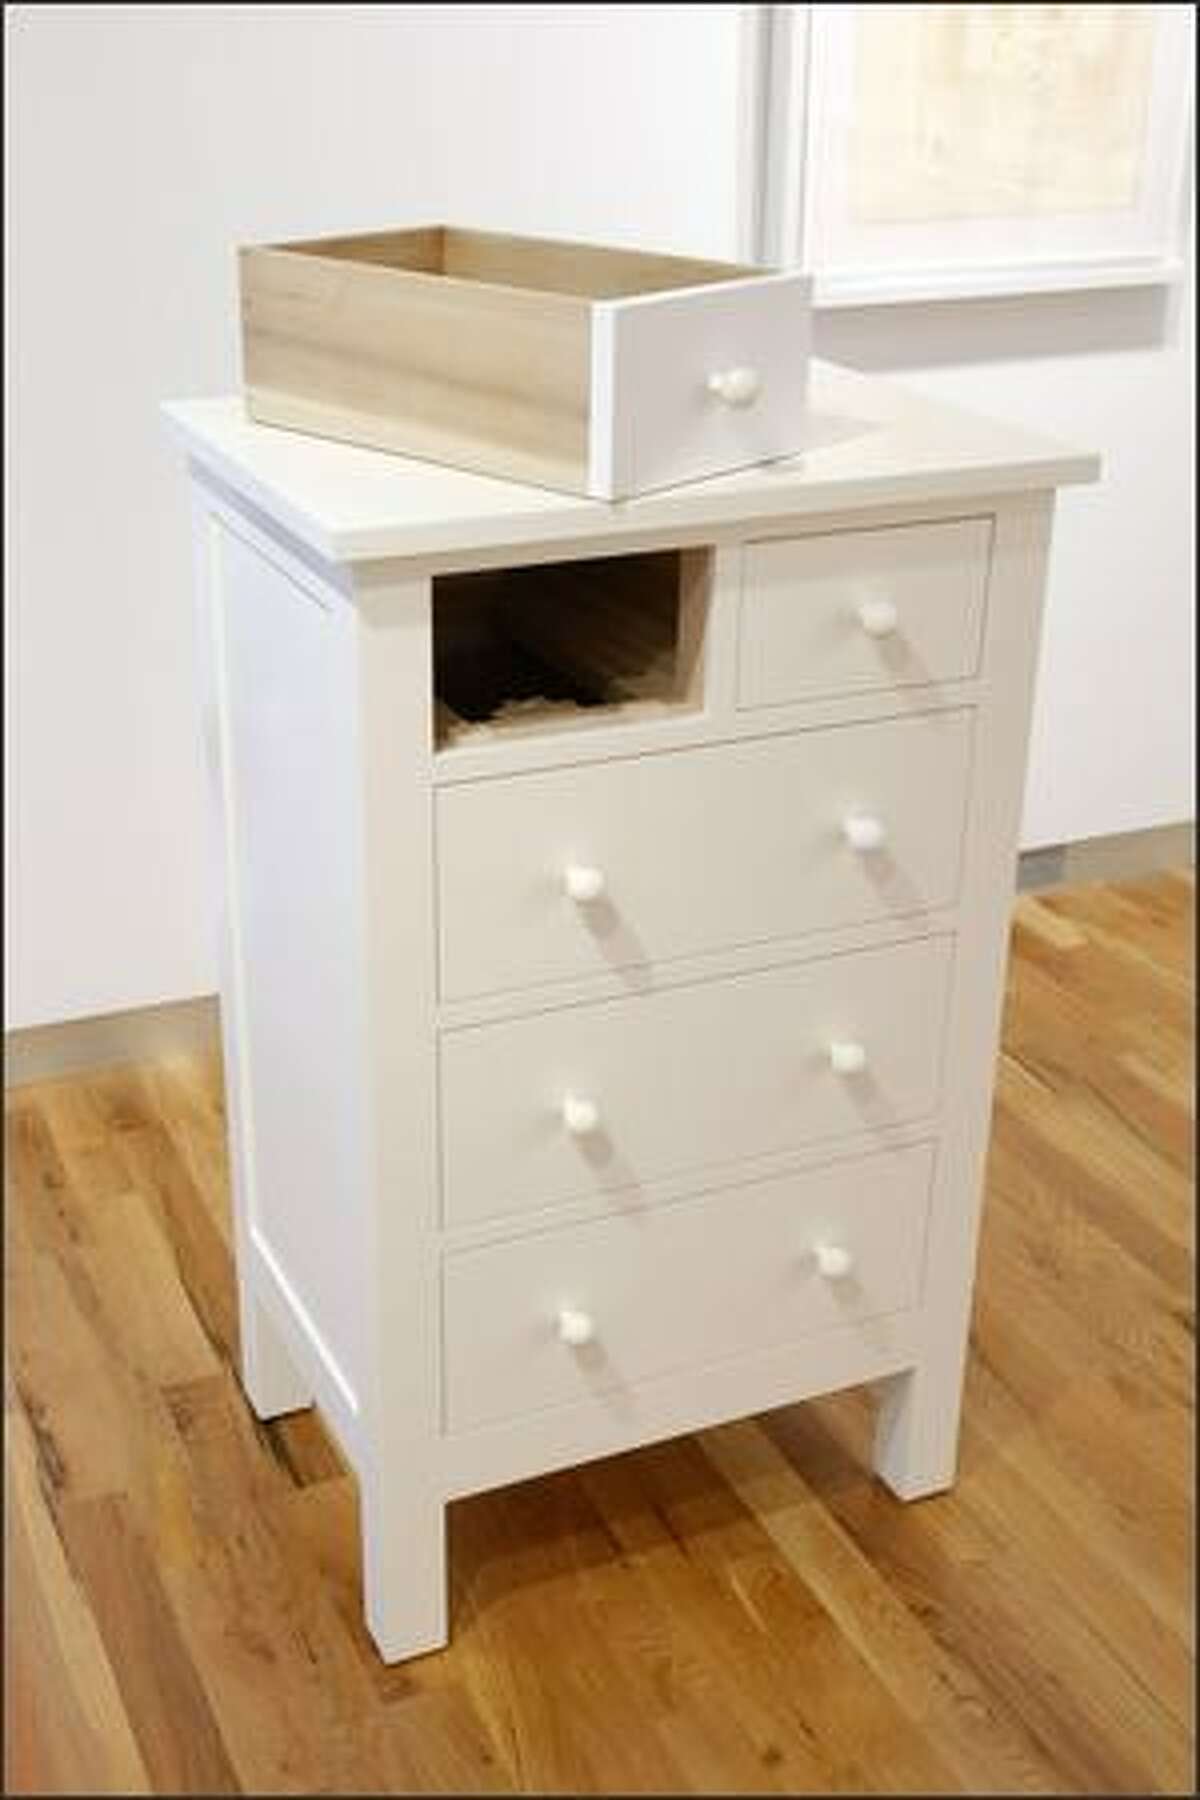 McMakin's chest of drawers, with one drawer that doesn't fit, (untitled), 2008.